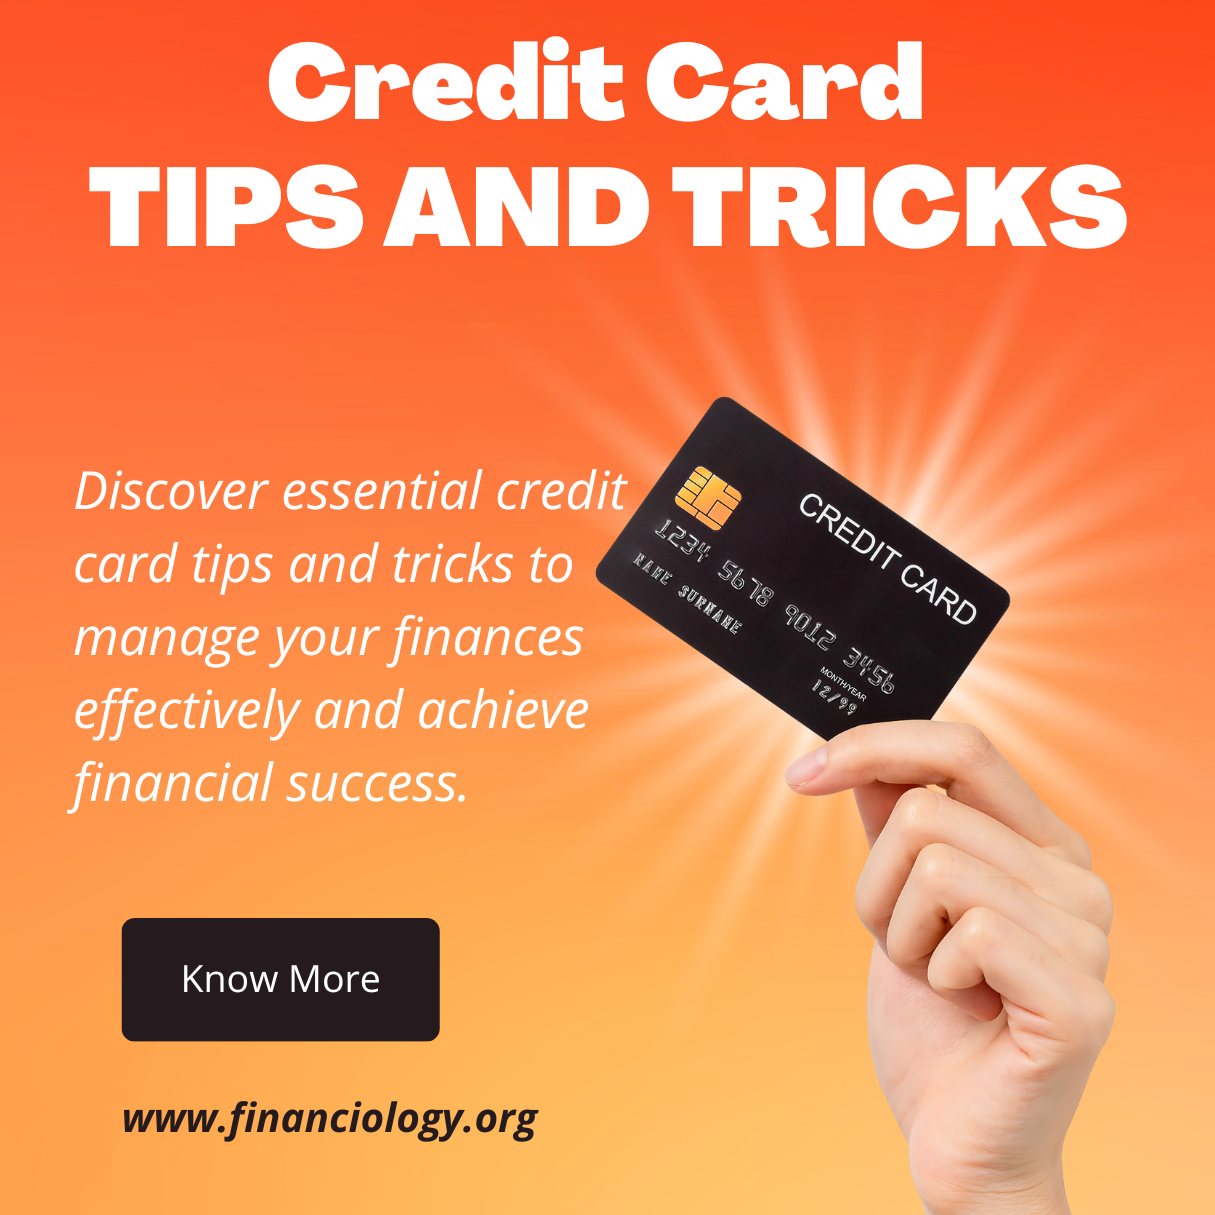 Credit Card Tips and Tricks; Improving Credit Score; Loans and Credit;